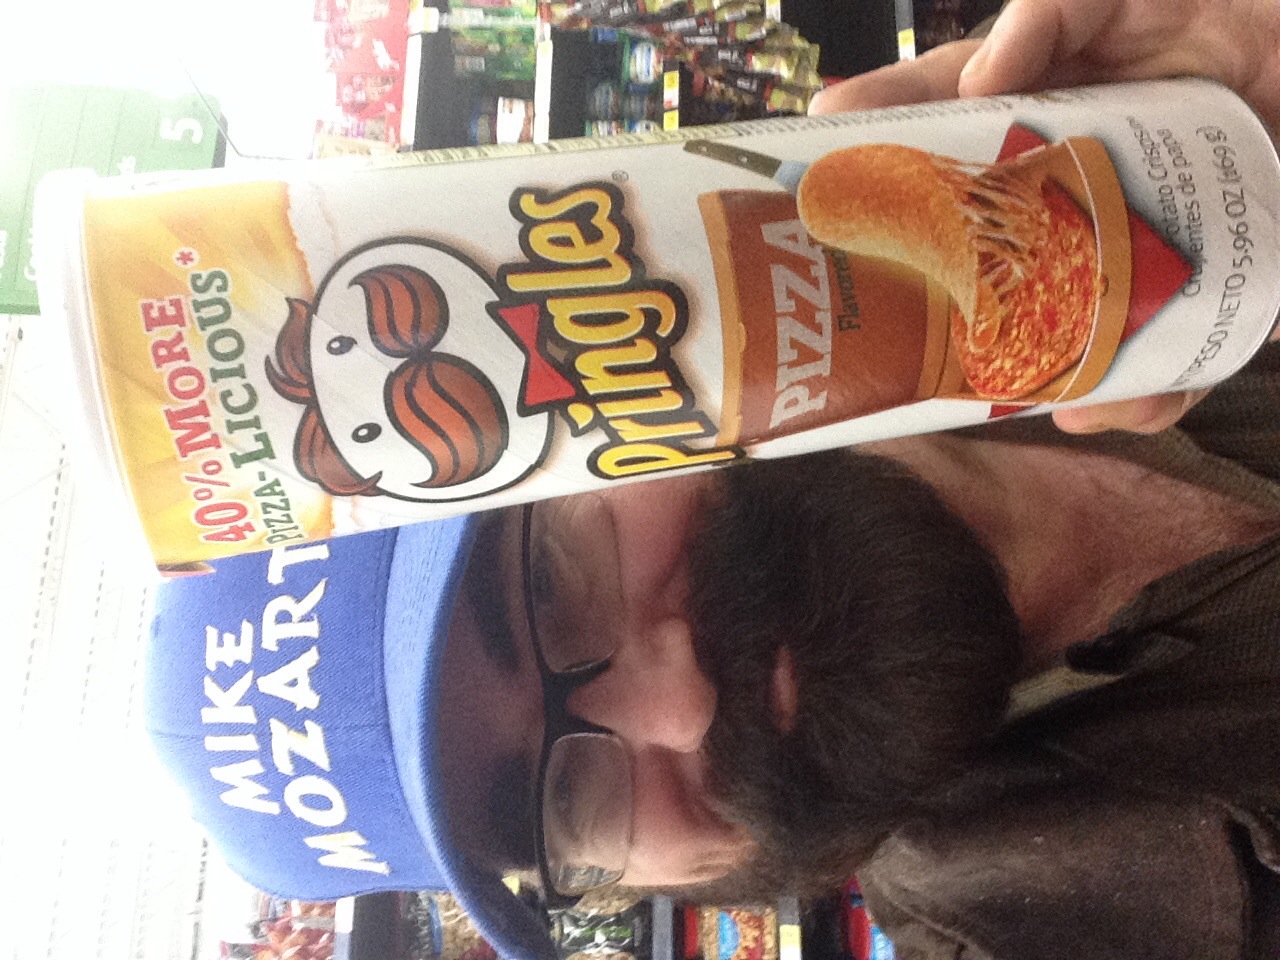 a man wearing a hat and glasses holding a box of pringles